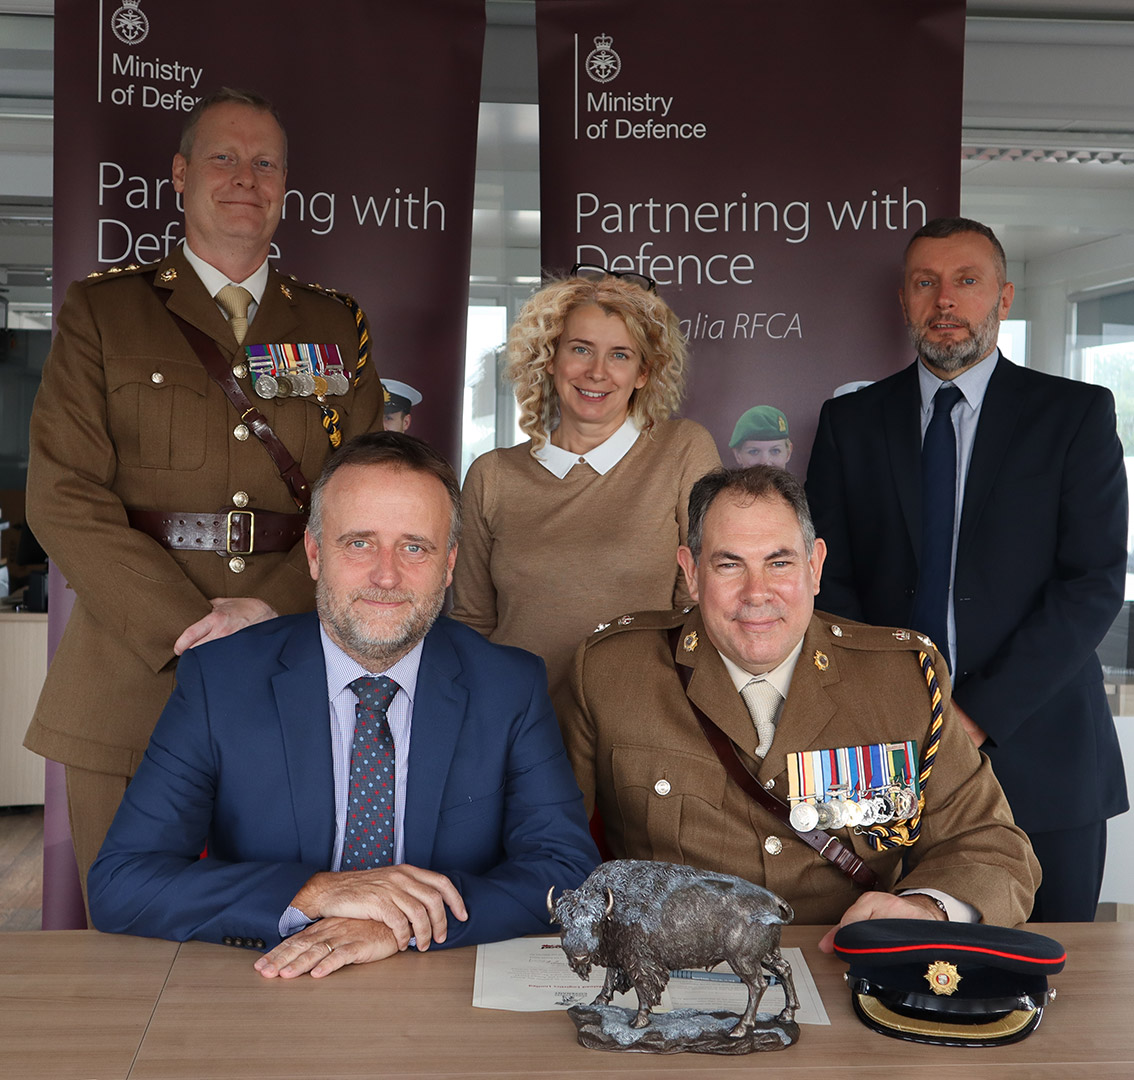 Back L to R: Capt Christian Hughes, 158 Regiment, Royal Logistic Corps; Julie Feltwell, Buffaload Managing Director; Julian Boulton, Compliance Director. Seated L and R: Ian Perks, Business Development Director;
Lt Col Andrew Gifford, CO 158 Regiment, RLC